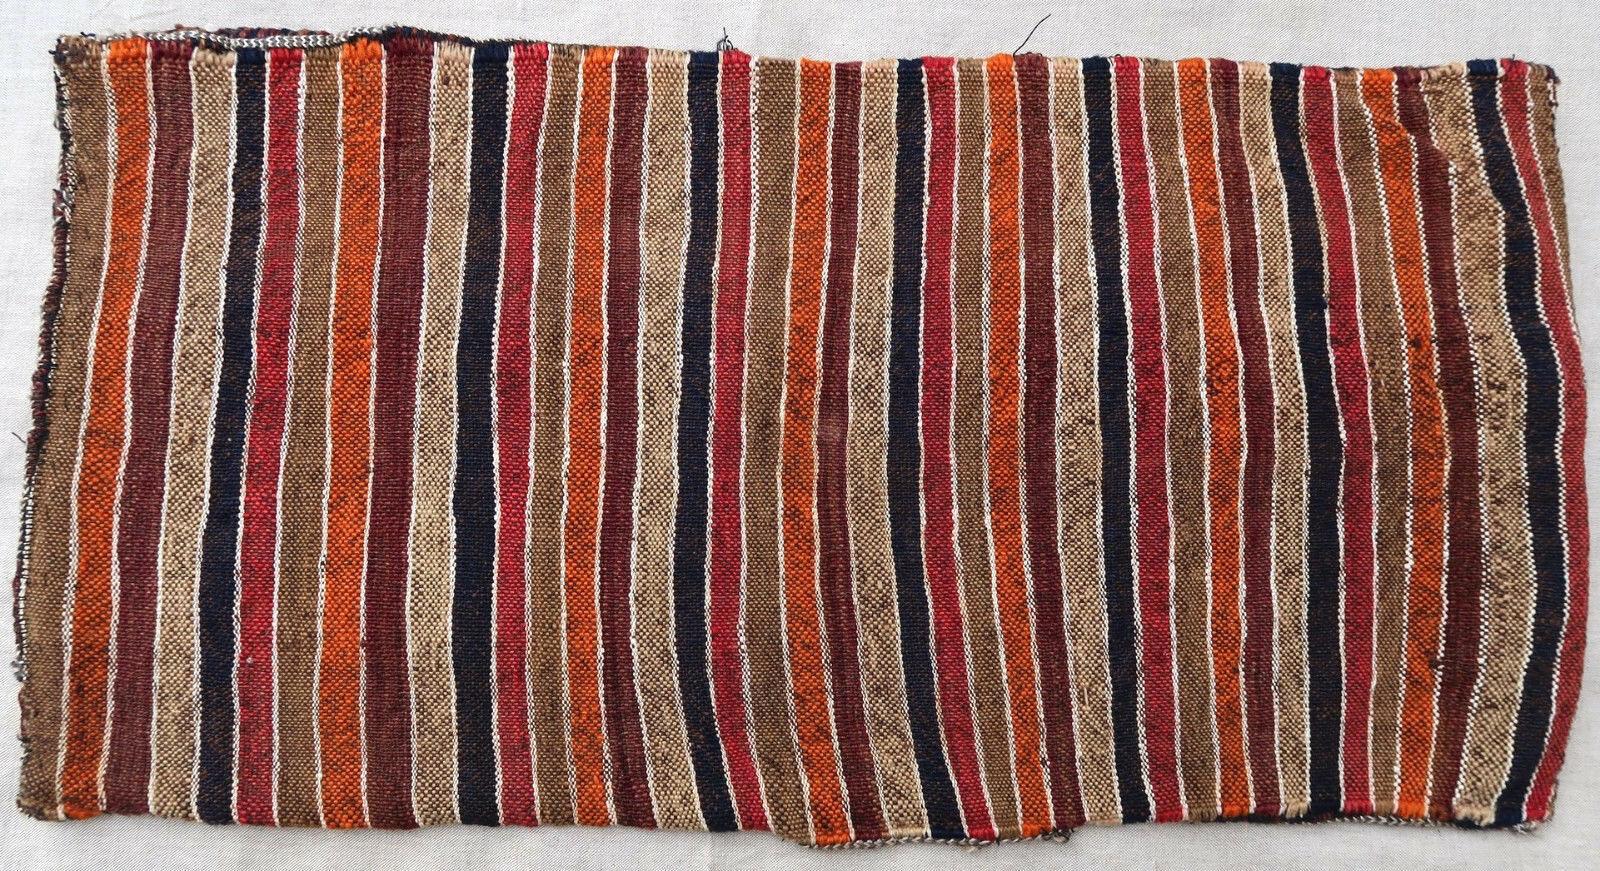 Handmade vintage Moroccan Berber cushion made out of vintage Kilim. The flat-weave is from the mid-20th century, it is in original good condition. 

- Condition: Original good,

- circa 1950s,

- Size: 1.1' x 2.3' (35cm x 70cm),

- Material: